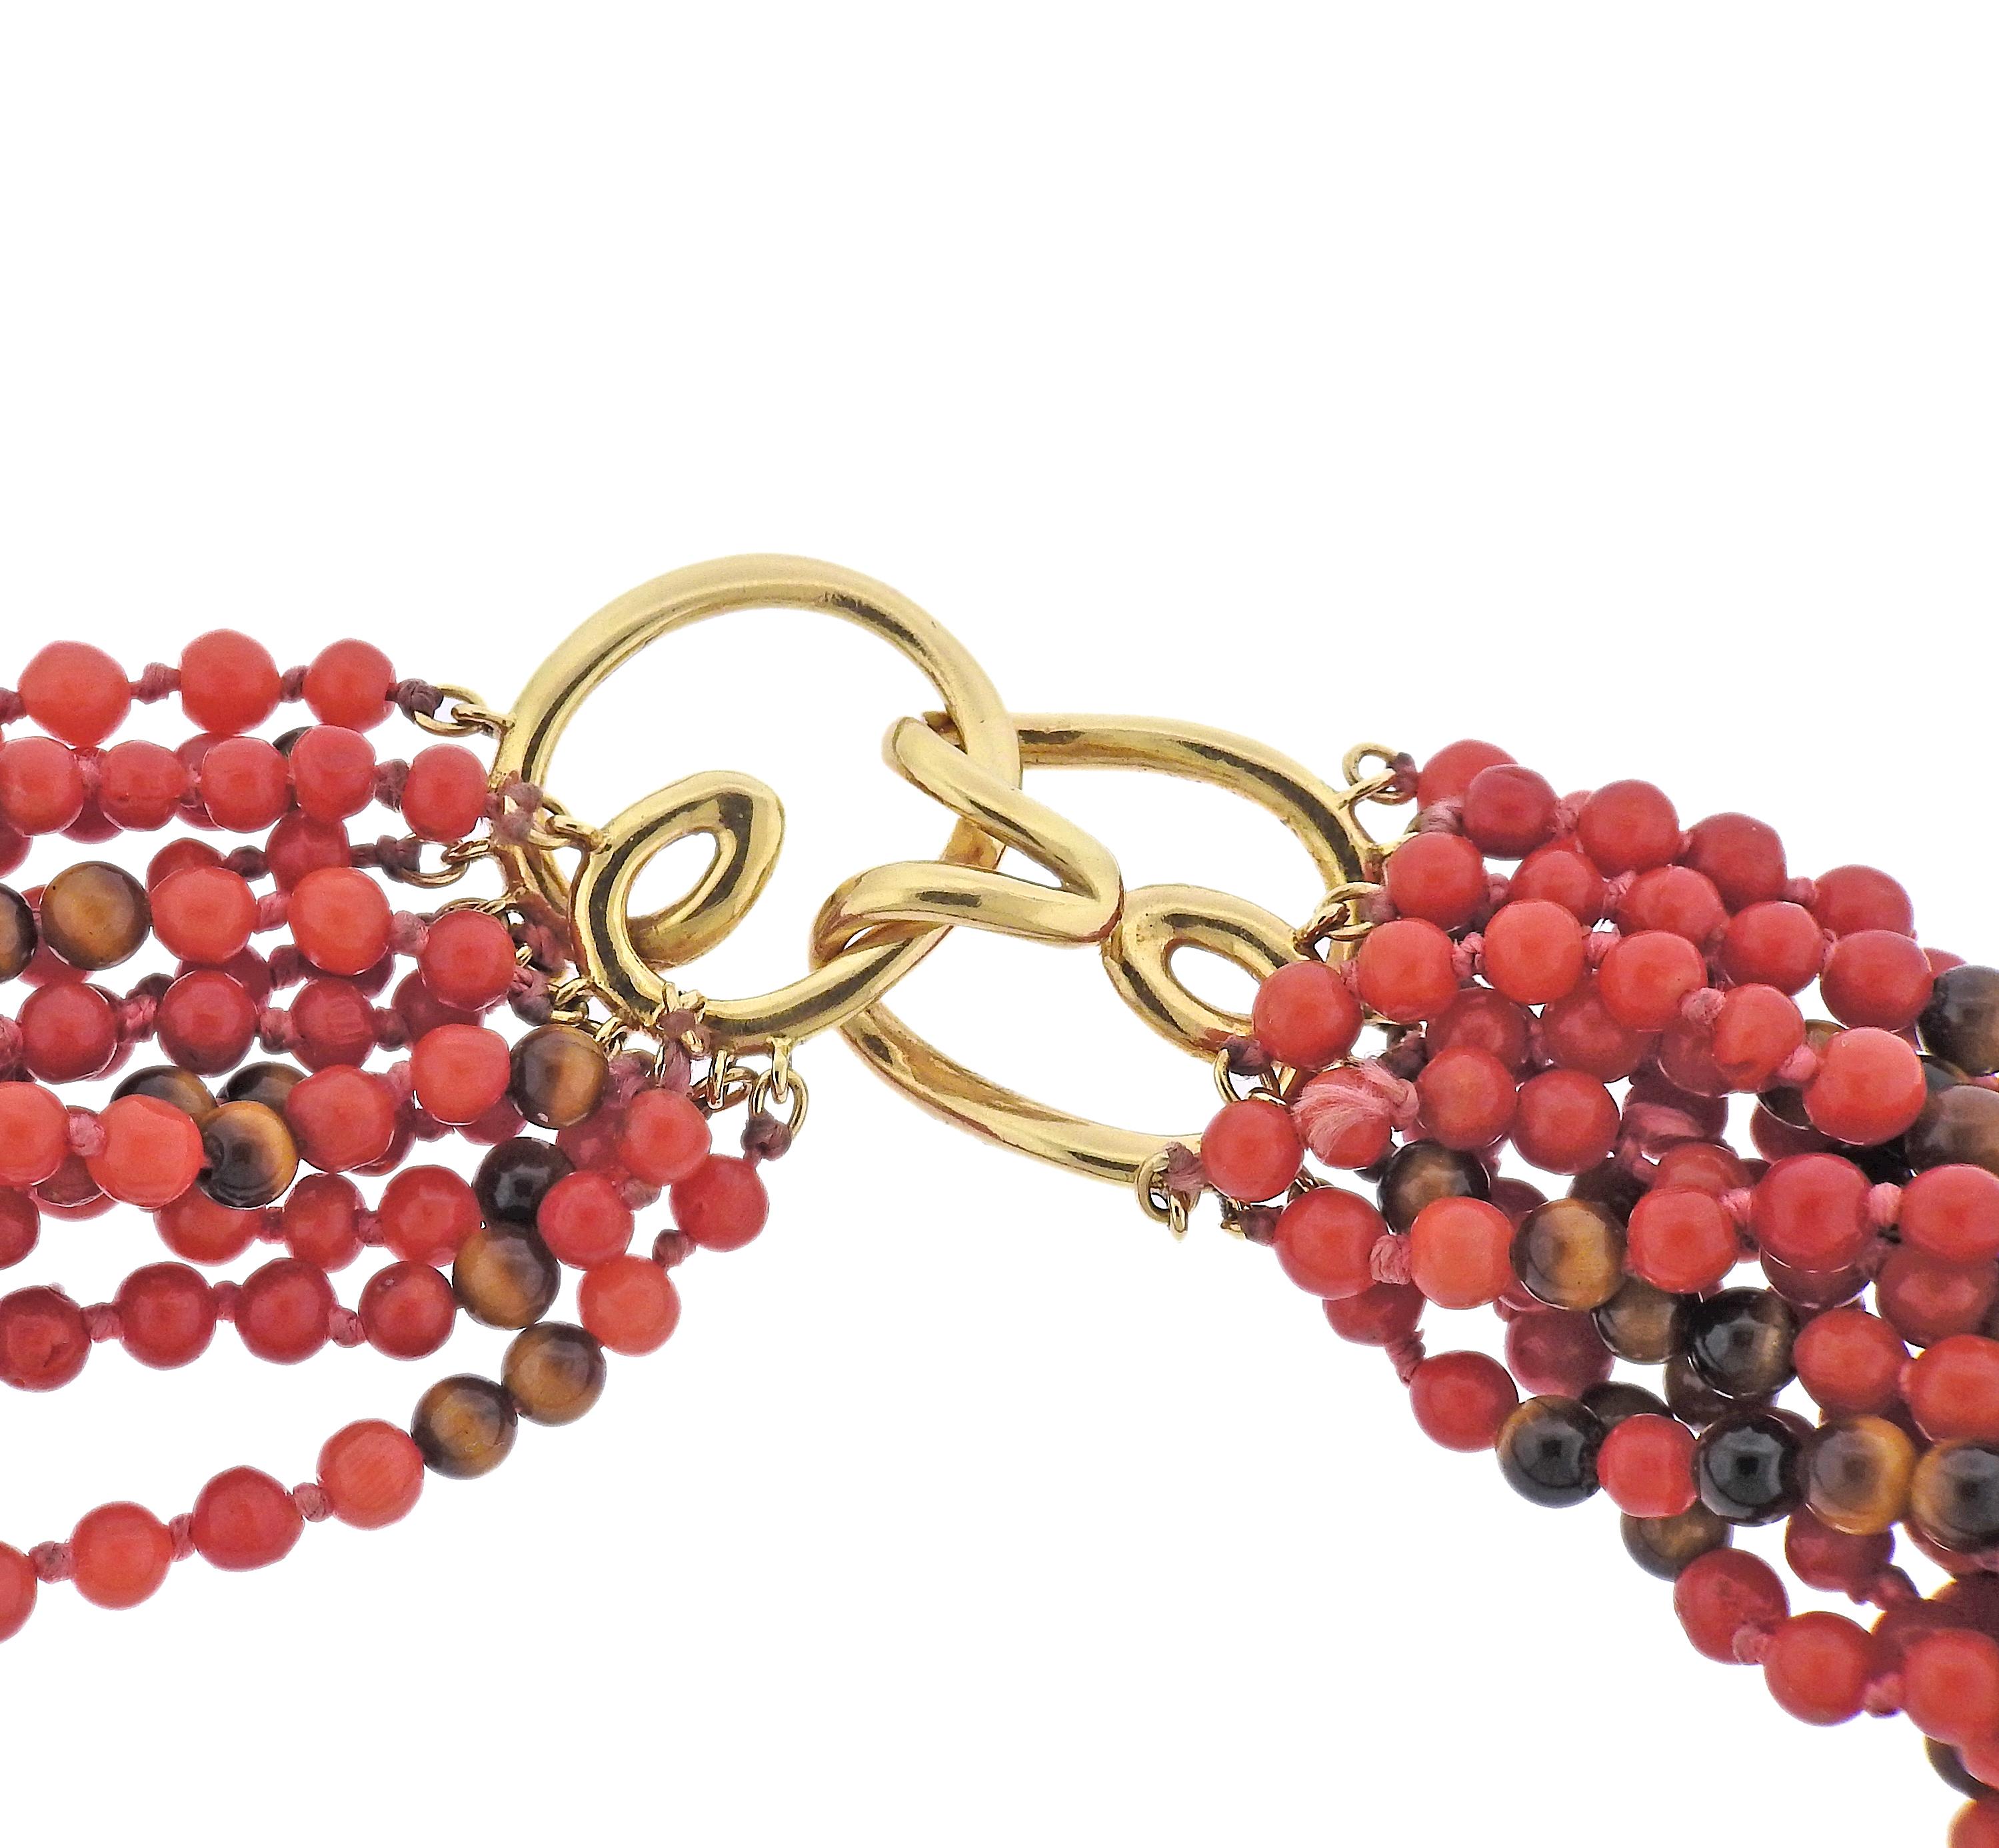 18k gold torsade necklace, with 12 strands of tiger's eye and coral beads. Necklace is approx. 18.5